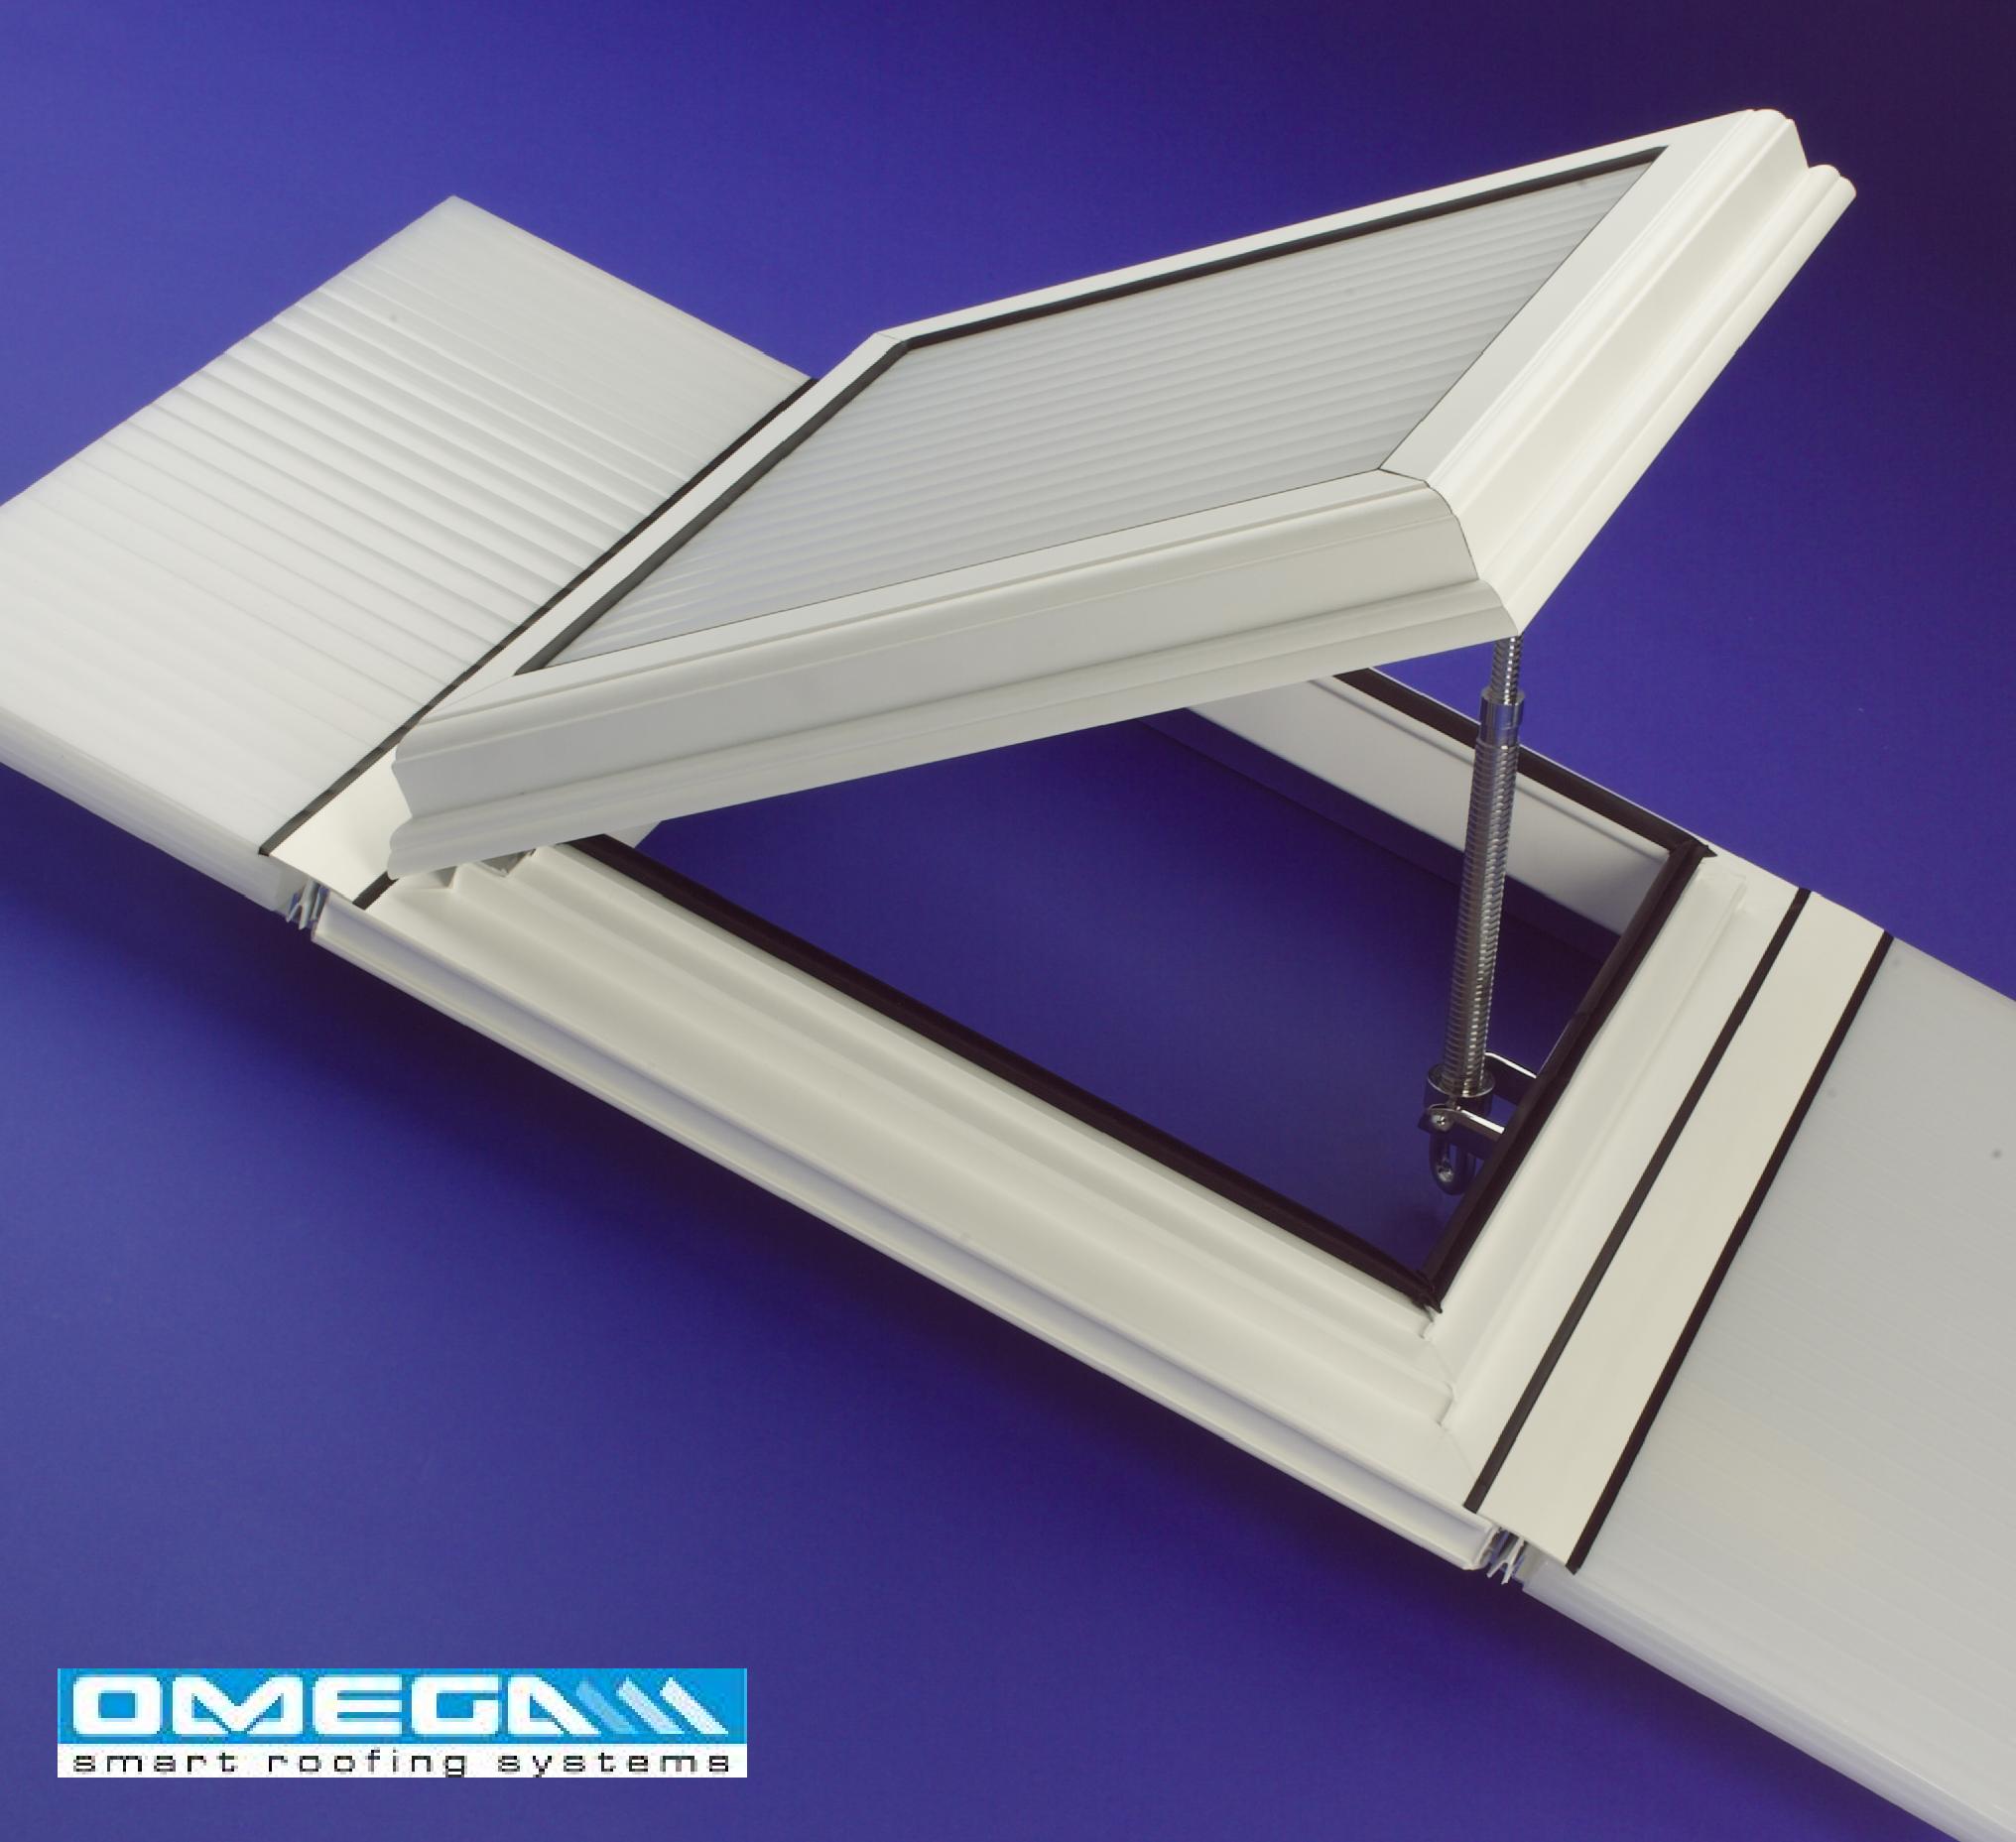 Aluminium/uPVC Conservatory Roof Vent (Bar-to-Bar) for 35mm thick polycarbonate